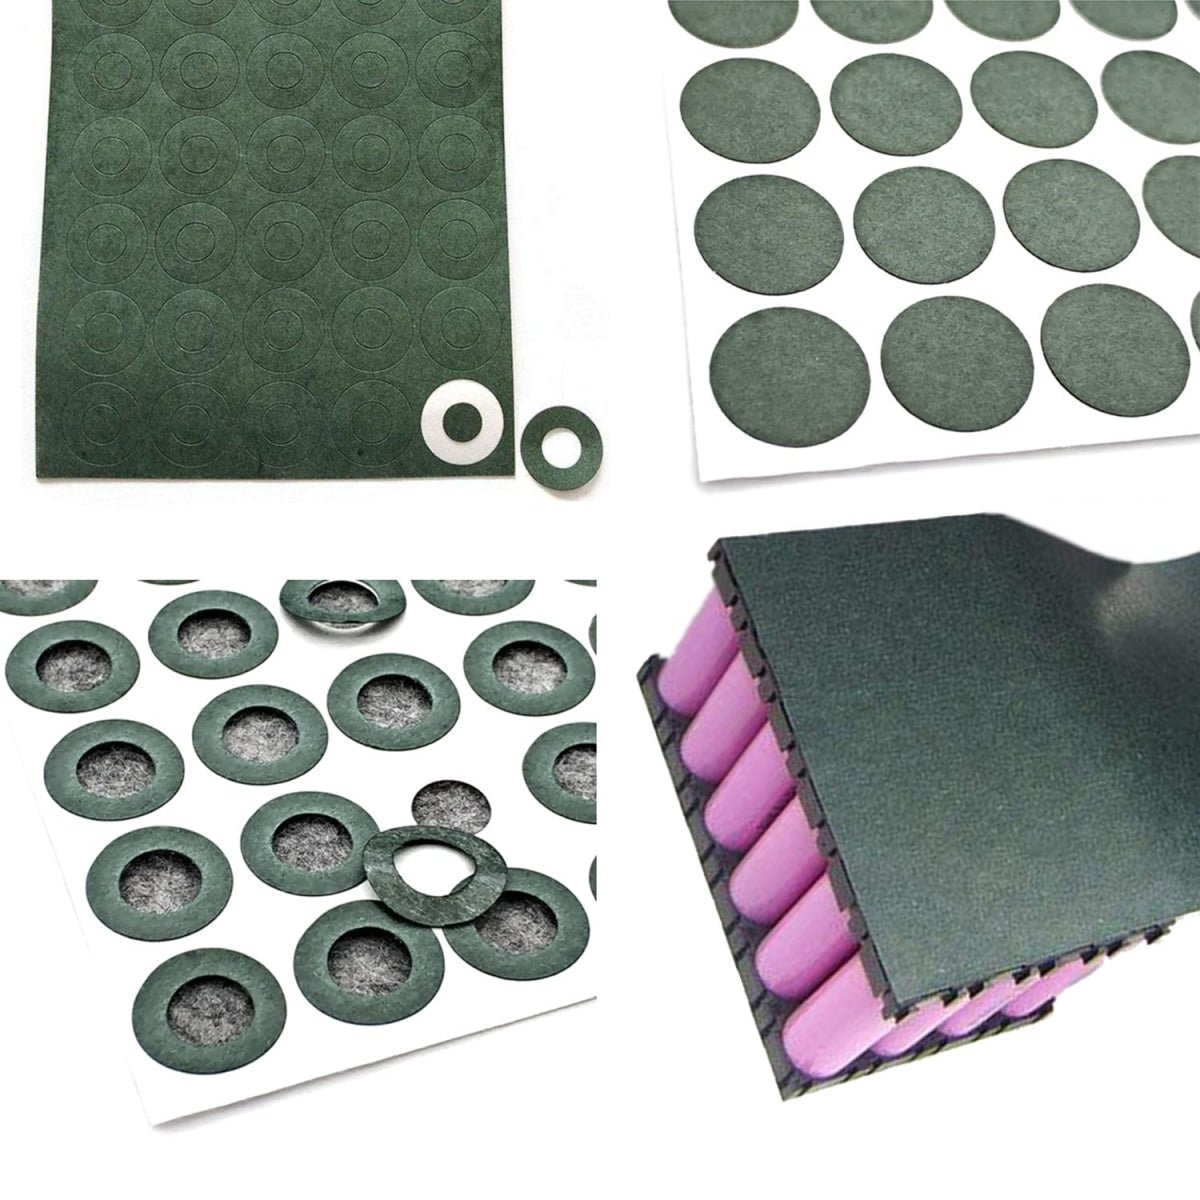 10mtr / 1000pcs 1S 18650 Barley Paper Li-ion Battery Insulation Gasket for Battery Pack Pad - 1000 circle outlines - - Asia Sell